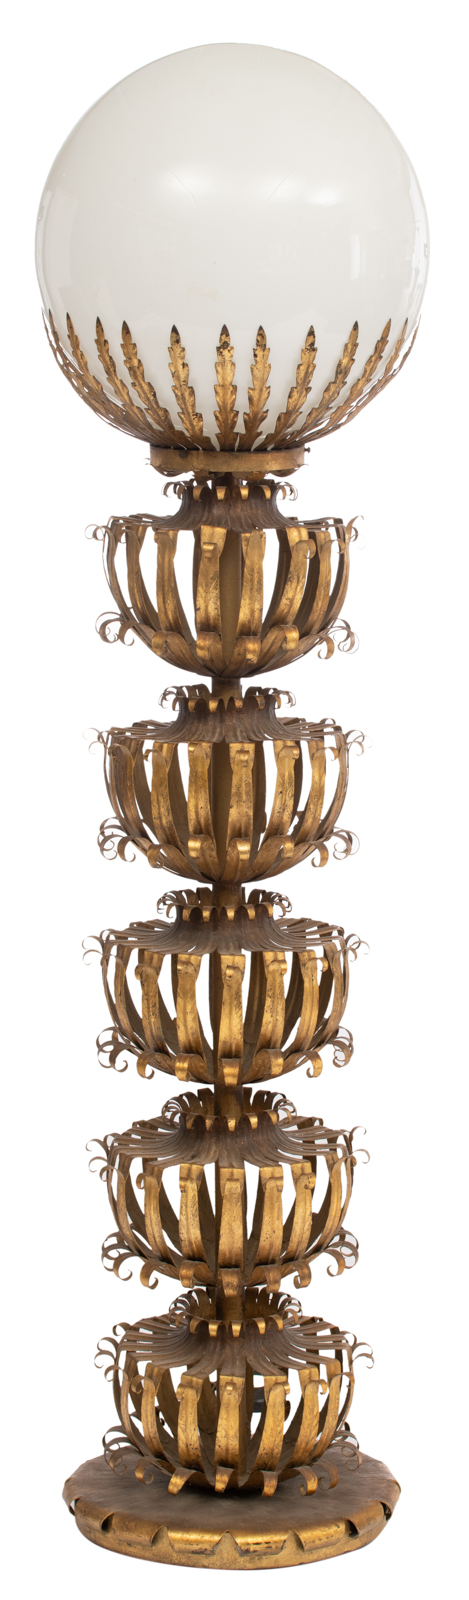 A mid-century vintage floor lamp, a gilt brass floral decorated stand with a balloon-shaped glass to